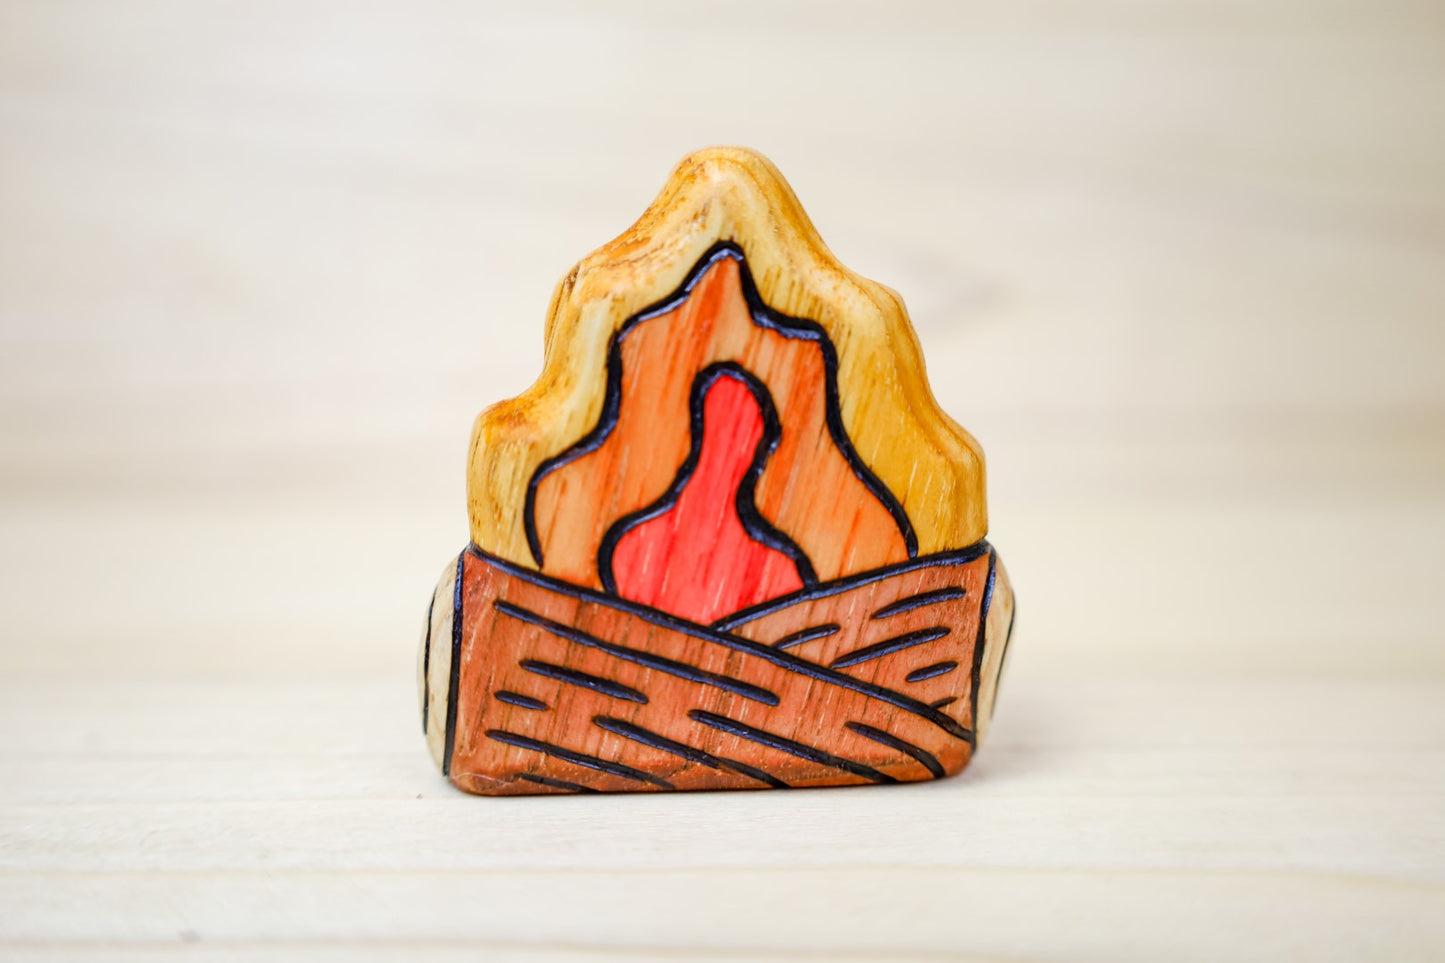 Wooden Campfire Toy